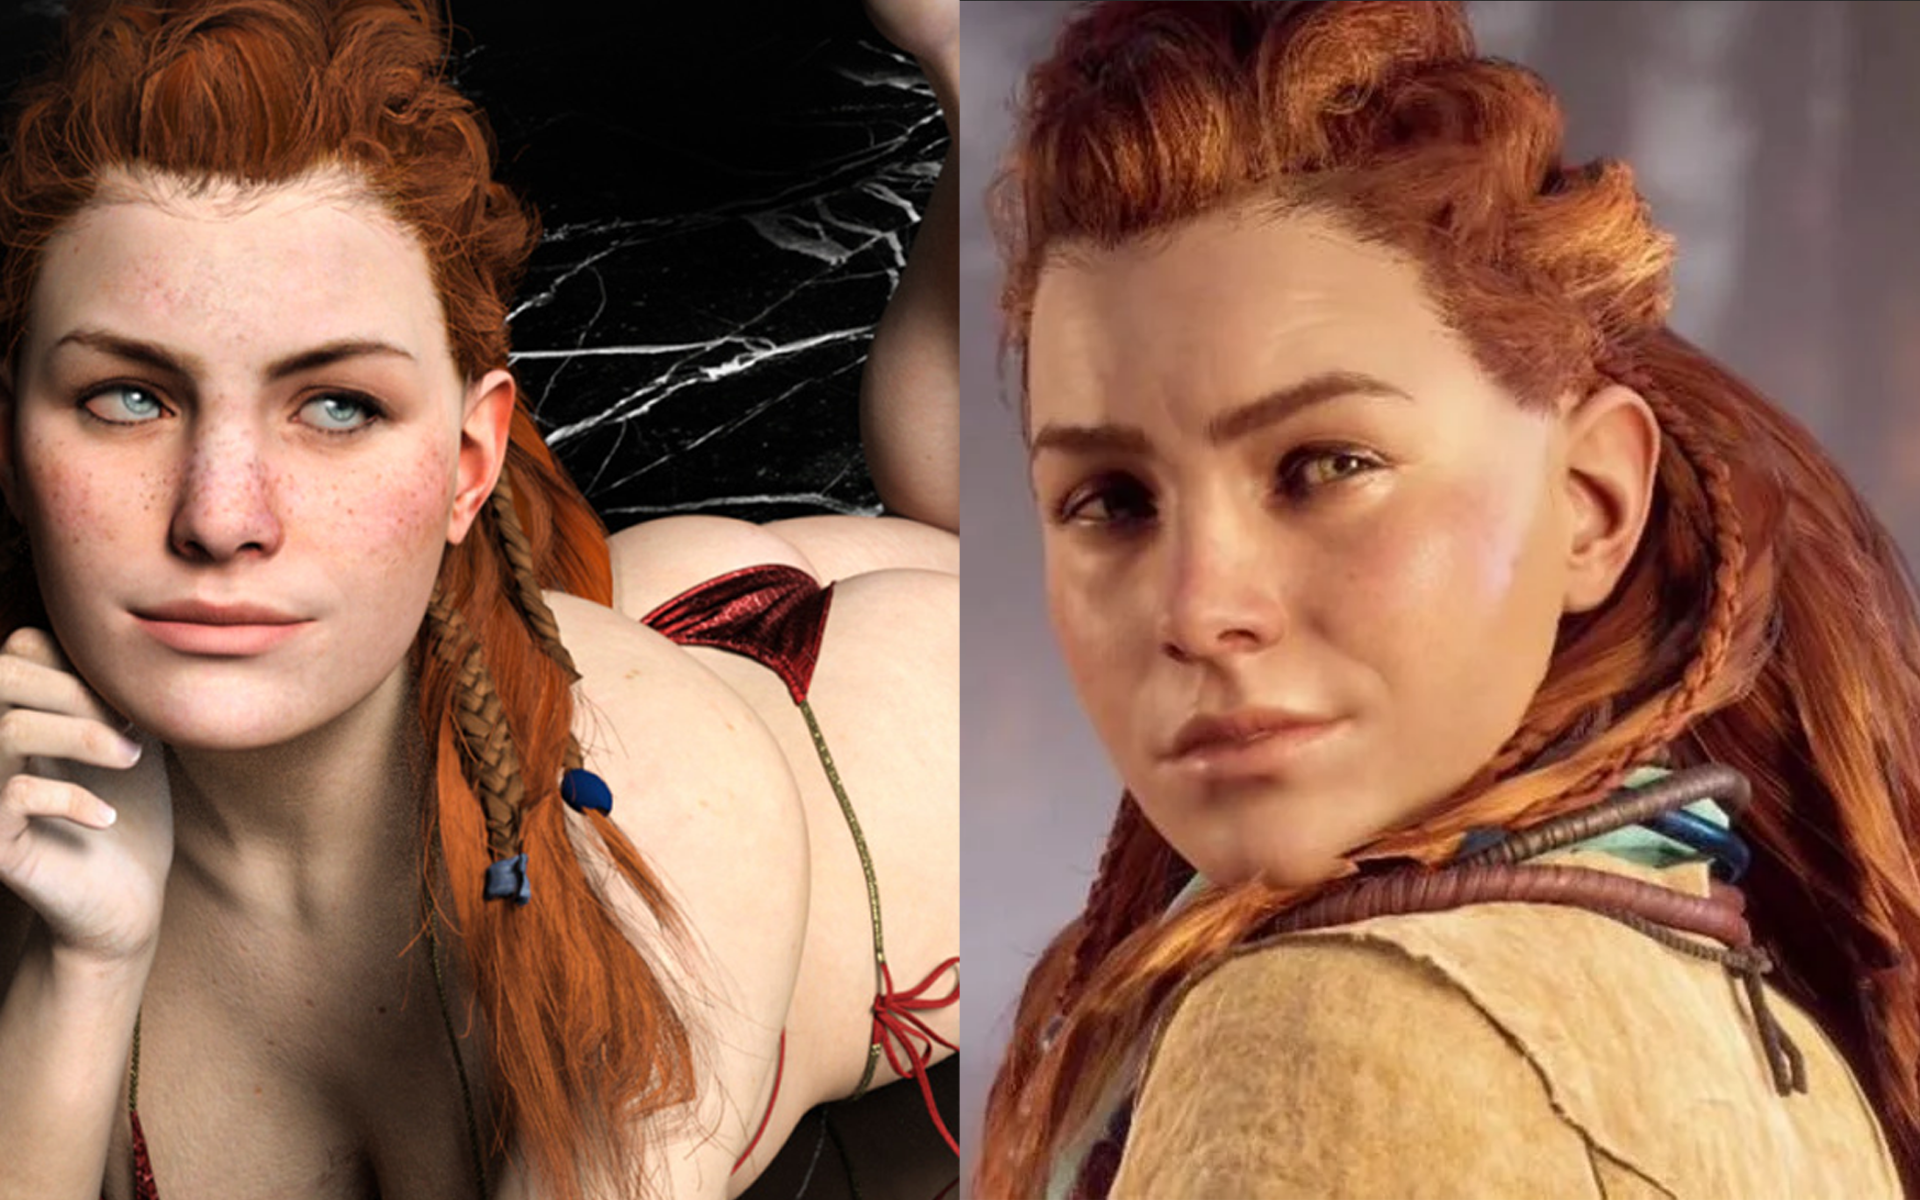 Horizon Porn - Developer Claims Sony Forced Them To Create Porn Of Horizon Protagonist  Aloy To Compete With Rival